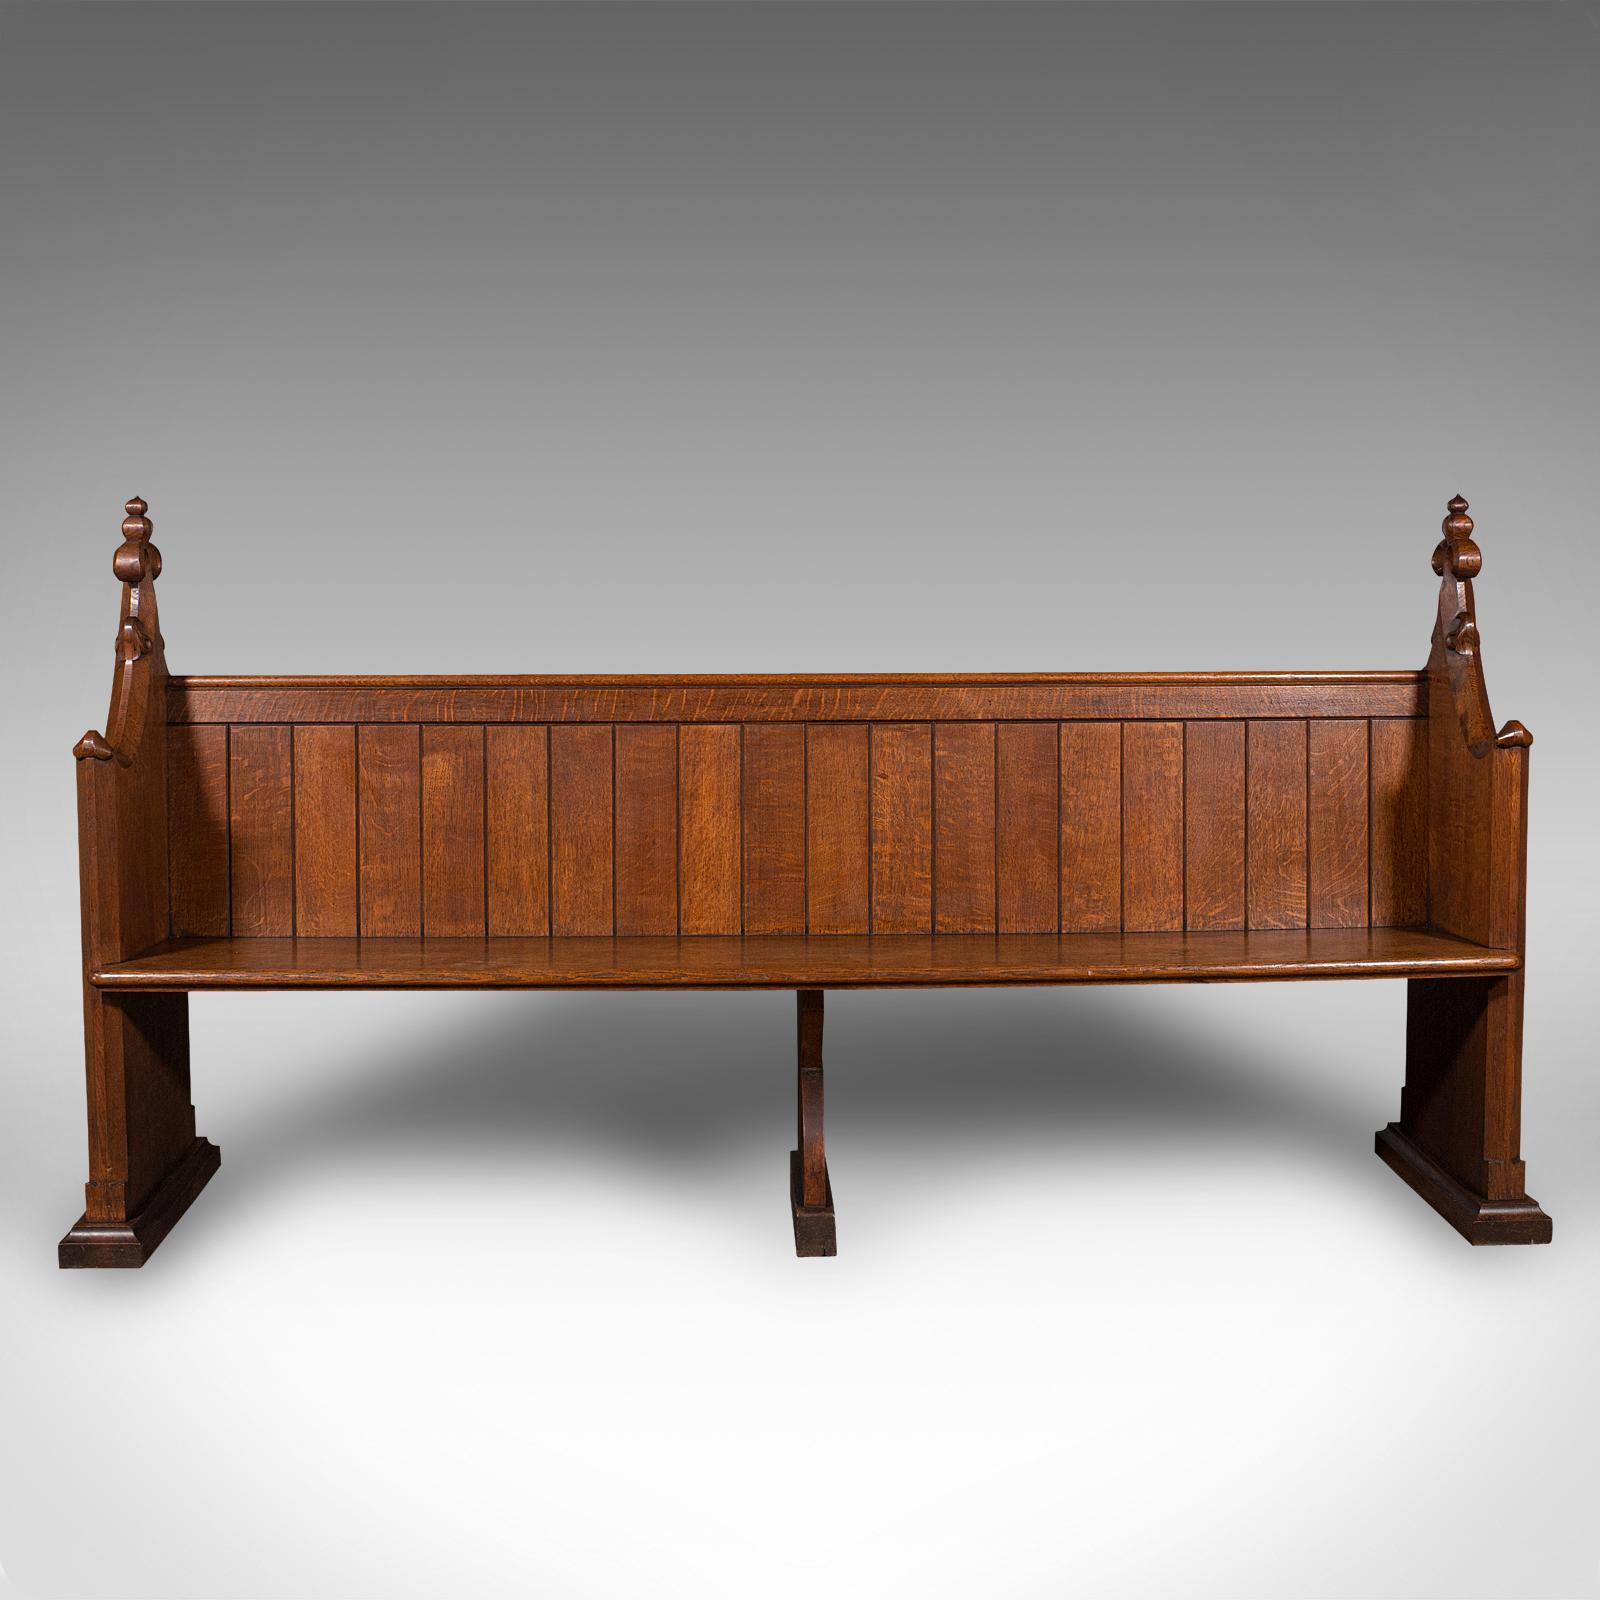 This is a large antique pew. A Scottish, oak ecclesiastical bench seat with Pugin-esque taste, dating to the early Victorian period, circa 1850.

Superb in proportion and finish, with overtones of Augustus Pugin's gothic revival